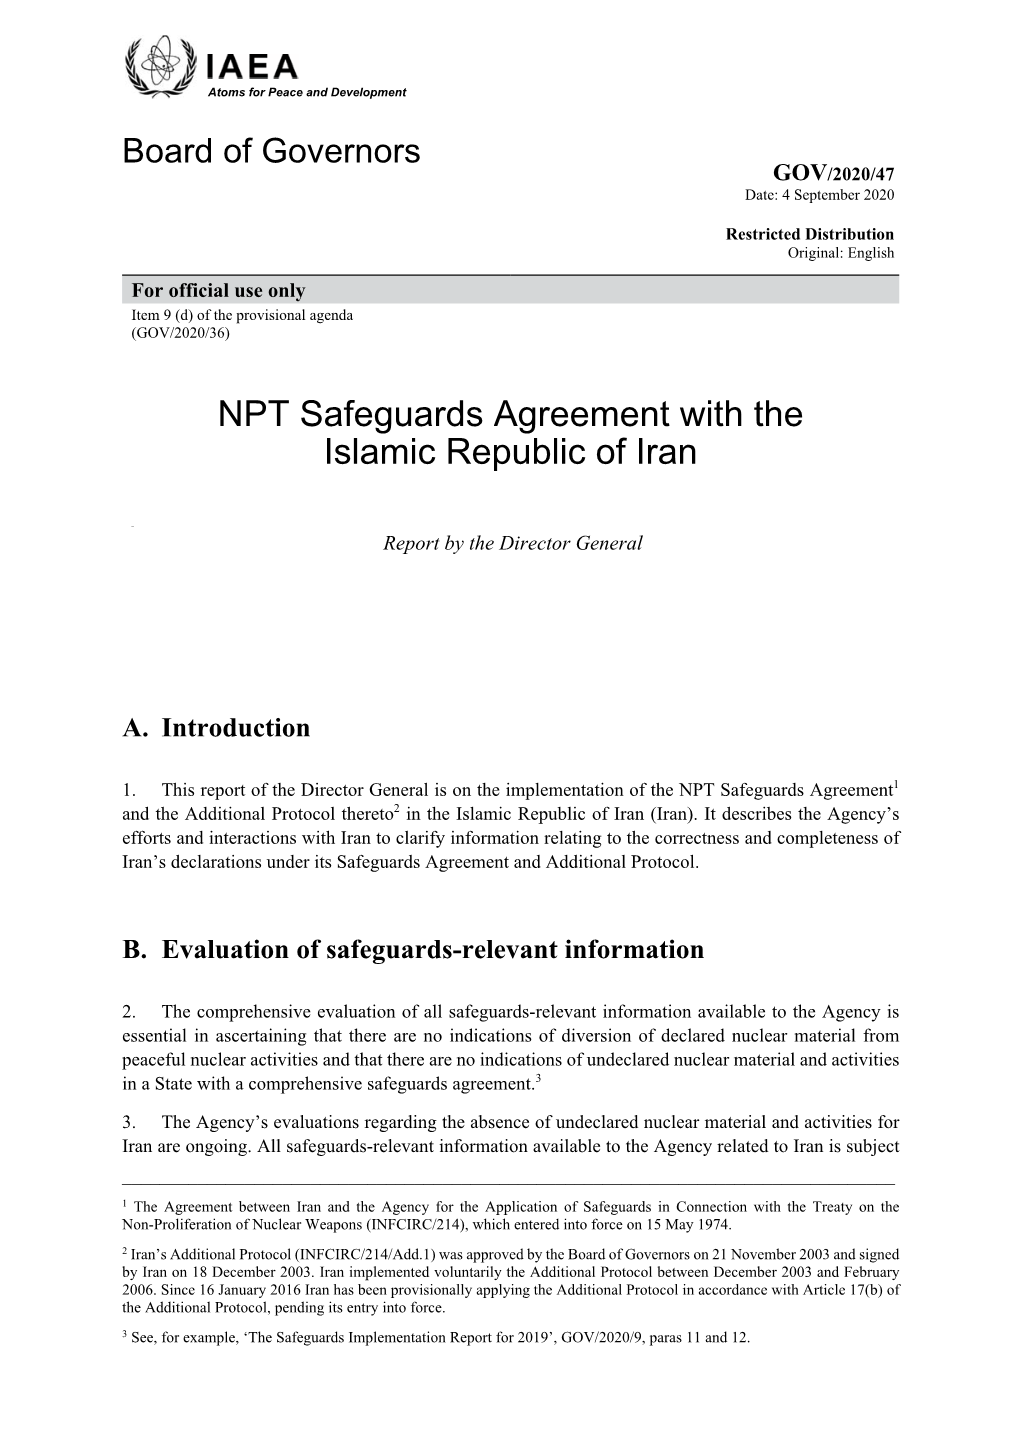 NPT Safeguards Agreement with the Islamic Republic of Iran